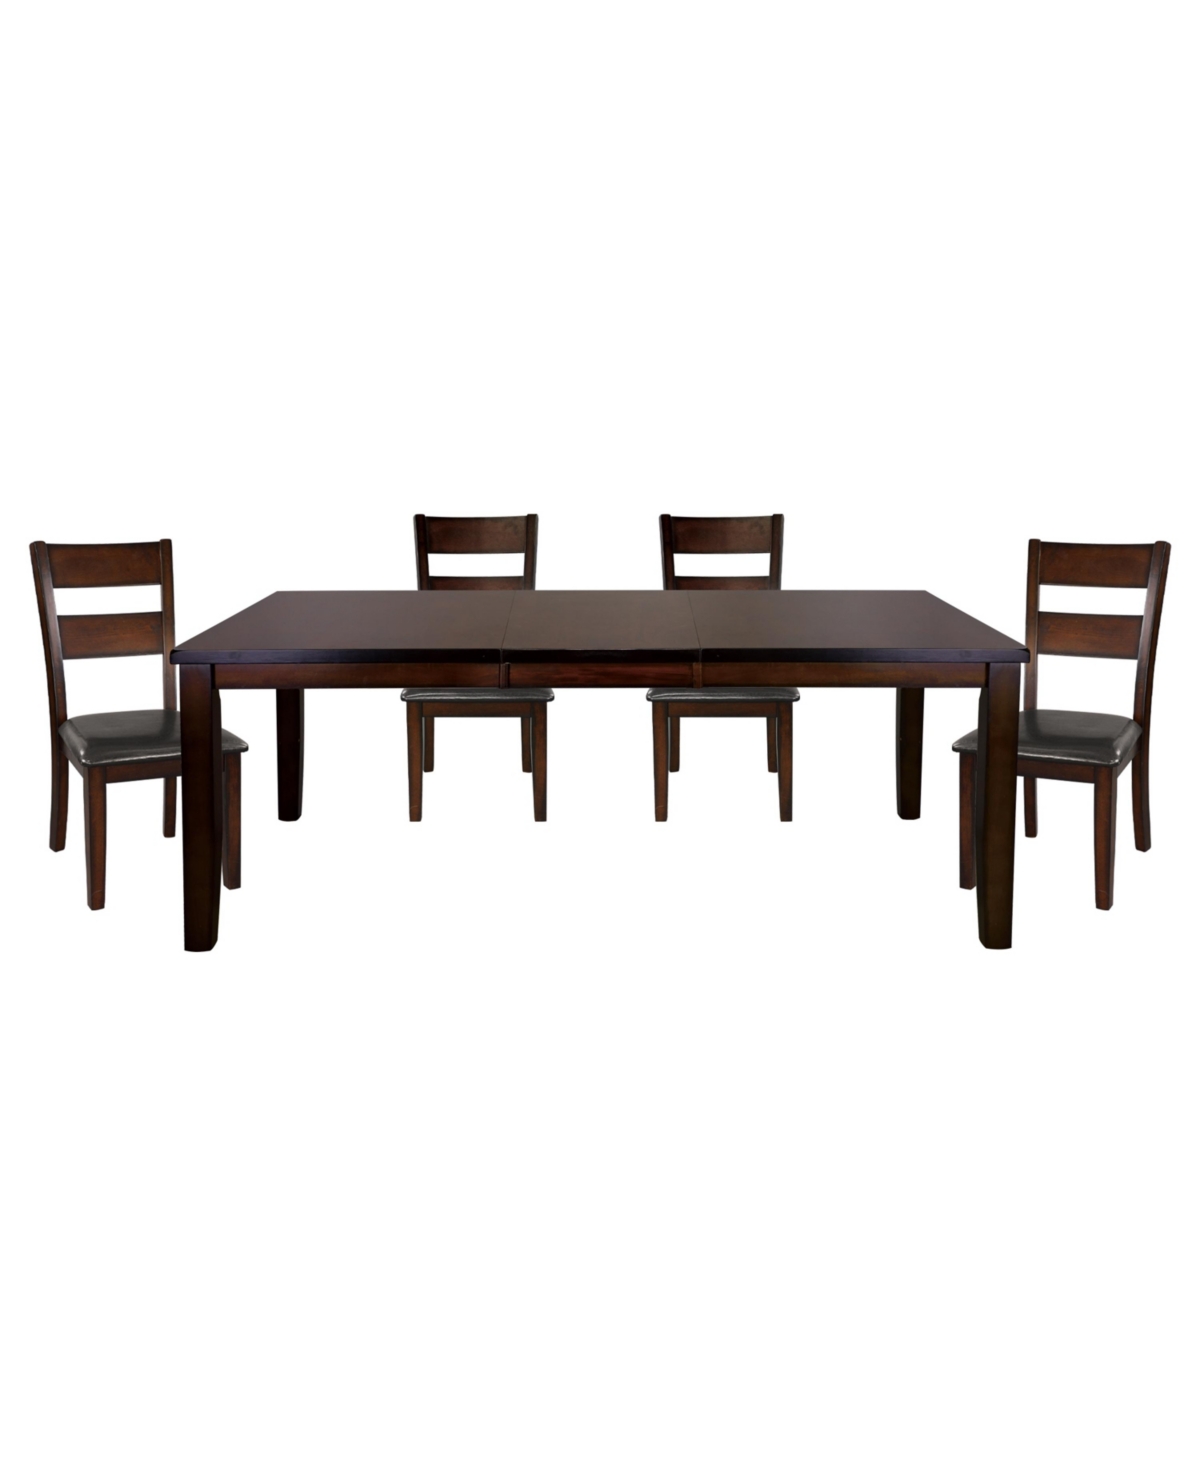 FURNITURE LEONA 5PC DINING SET (DINING TABLE & 4 SIDE CHAIRS)